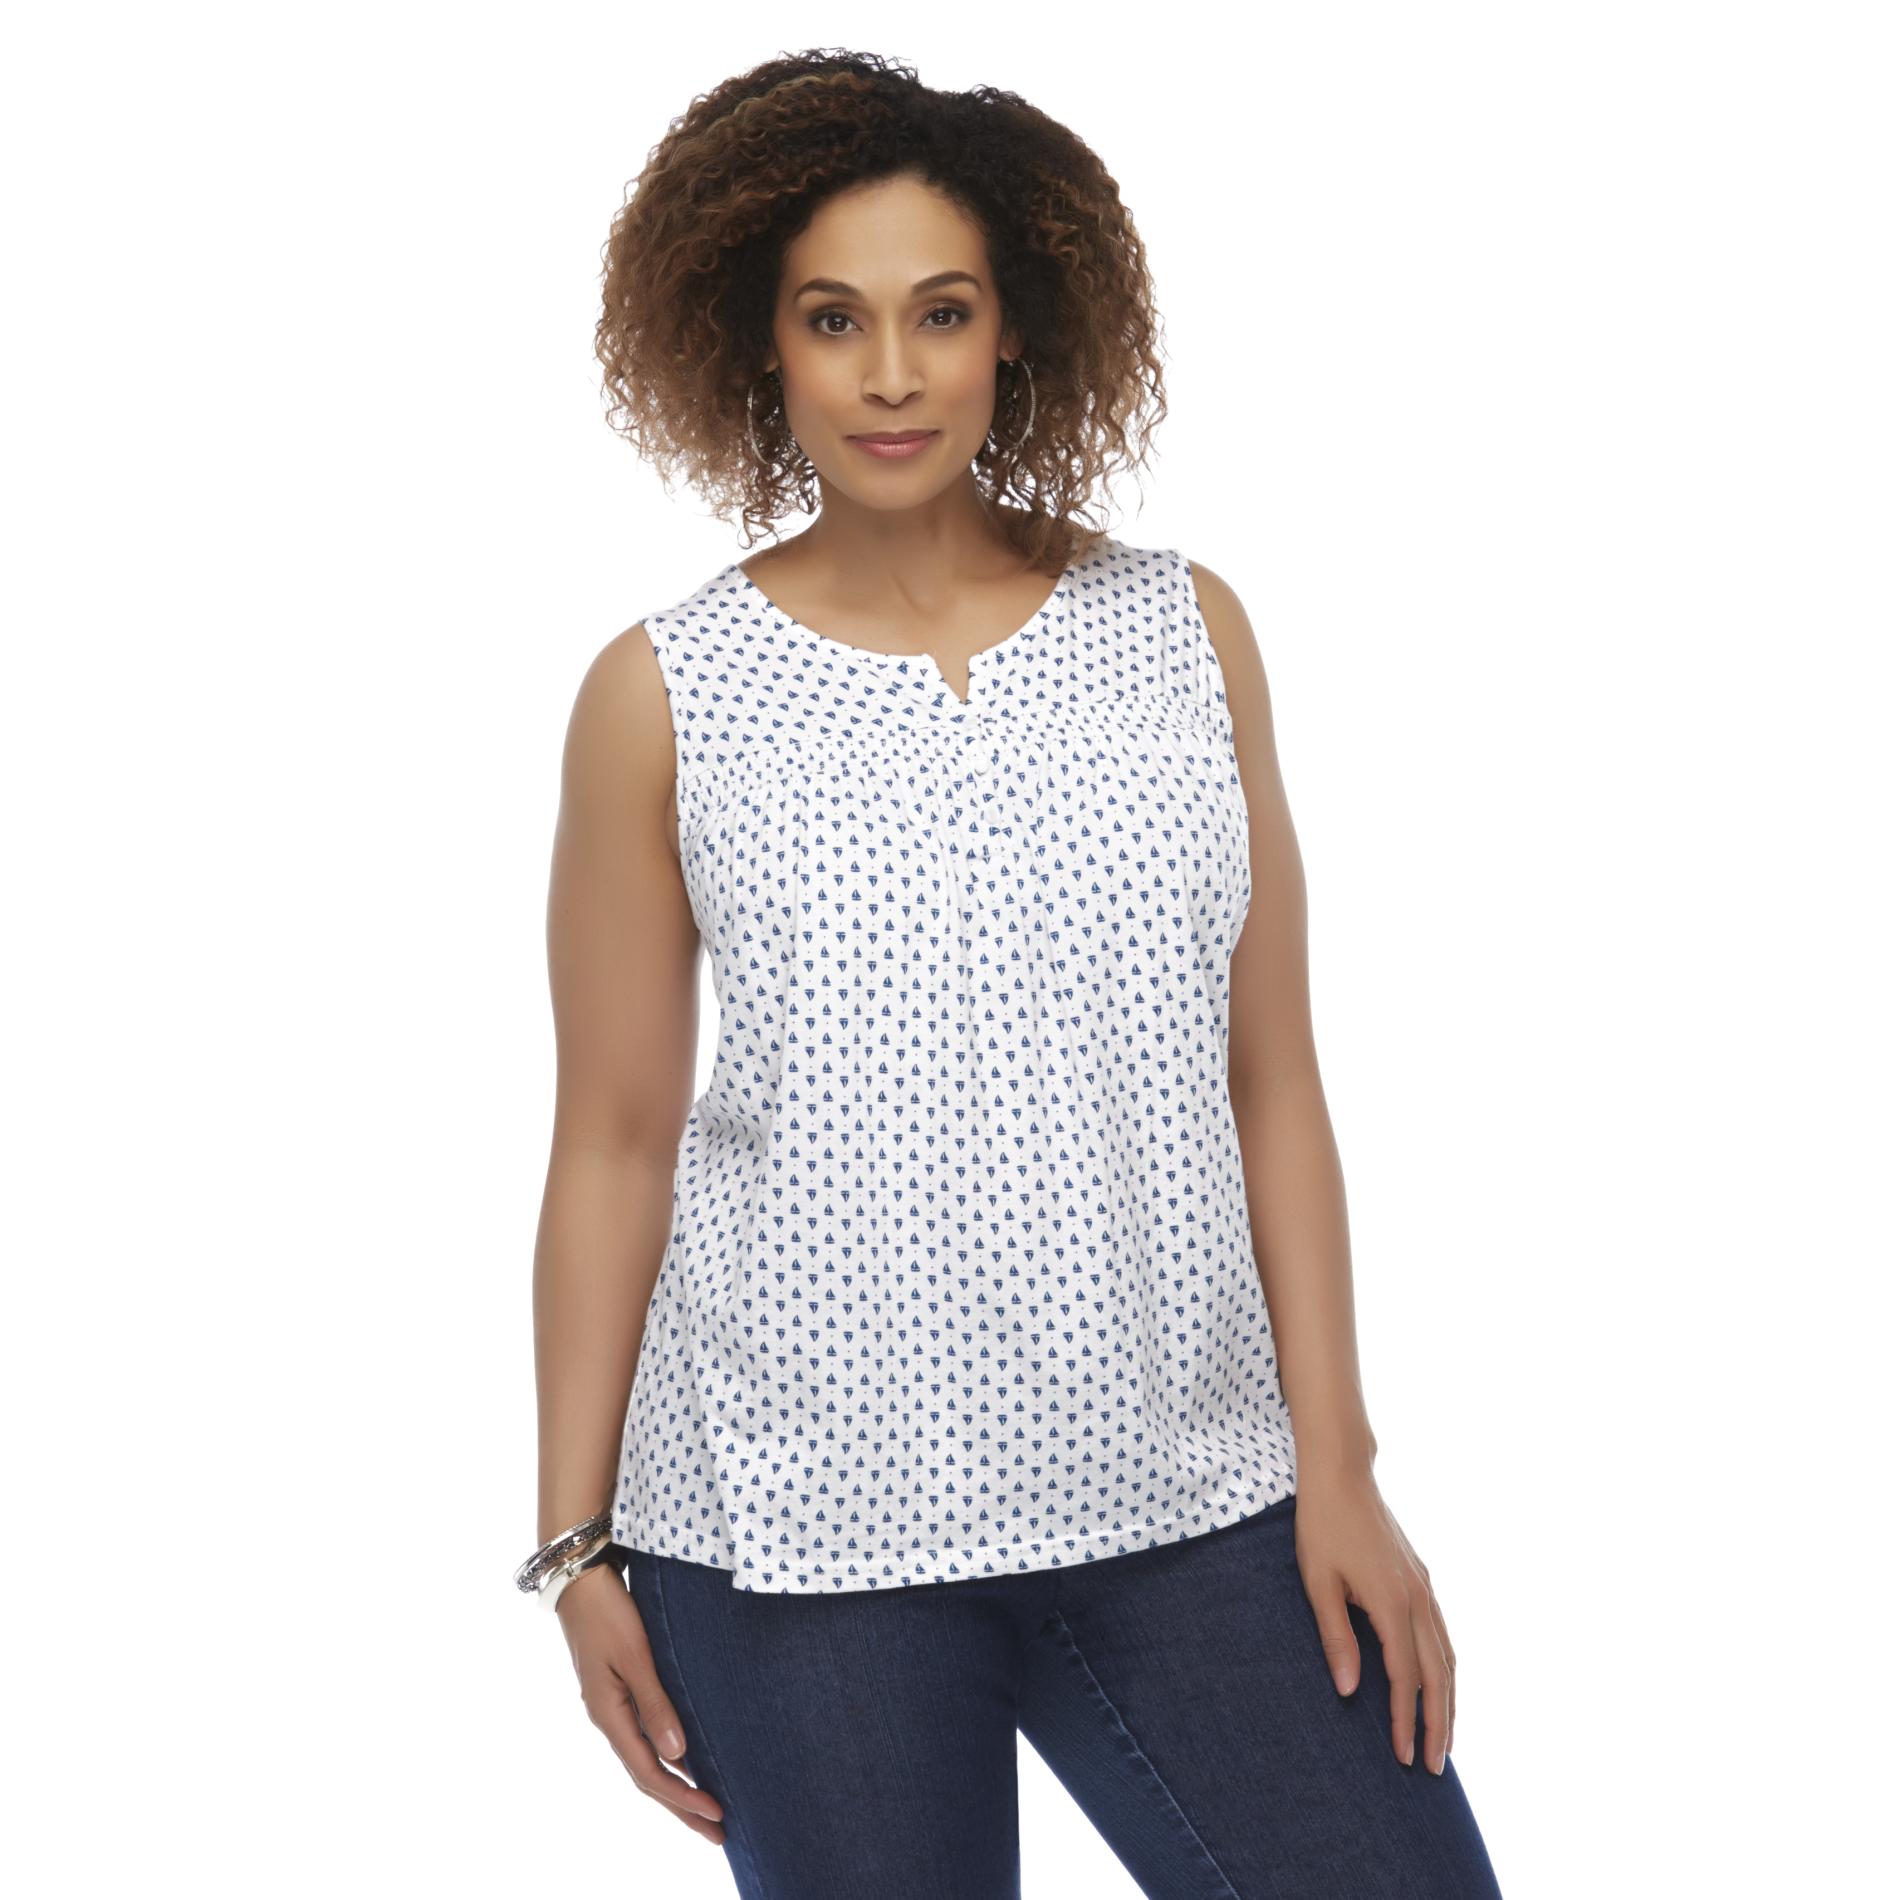 Basic Editions Women's Plus Smocked Tank Top - Sailboats